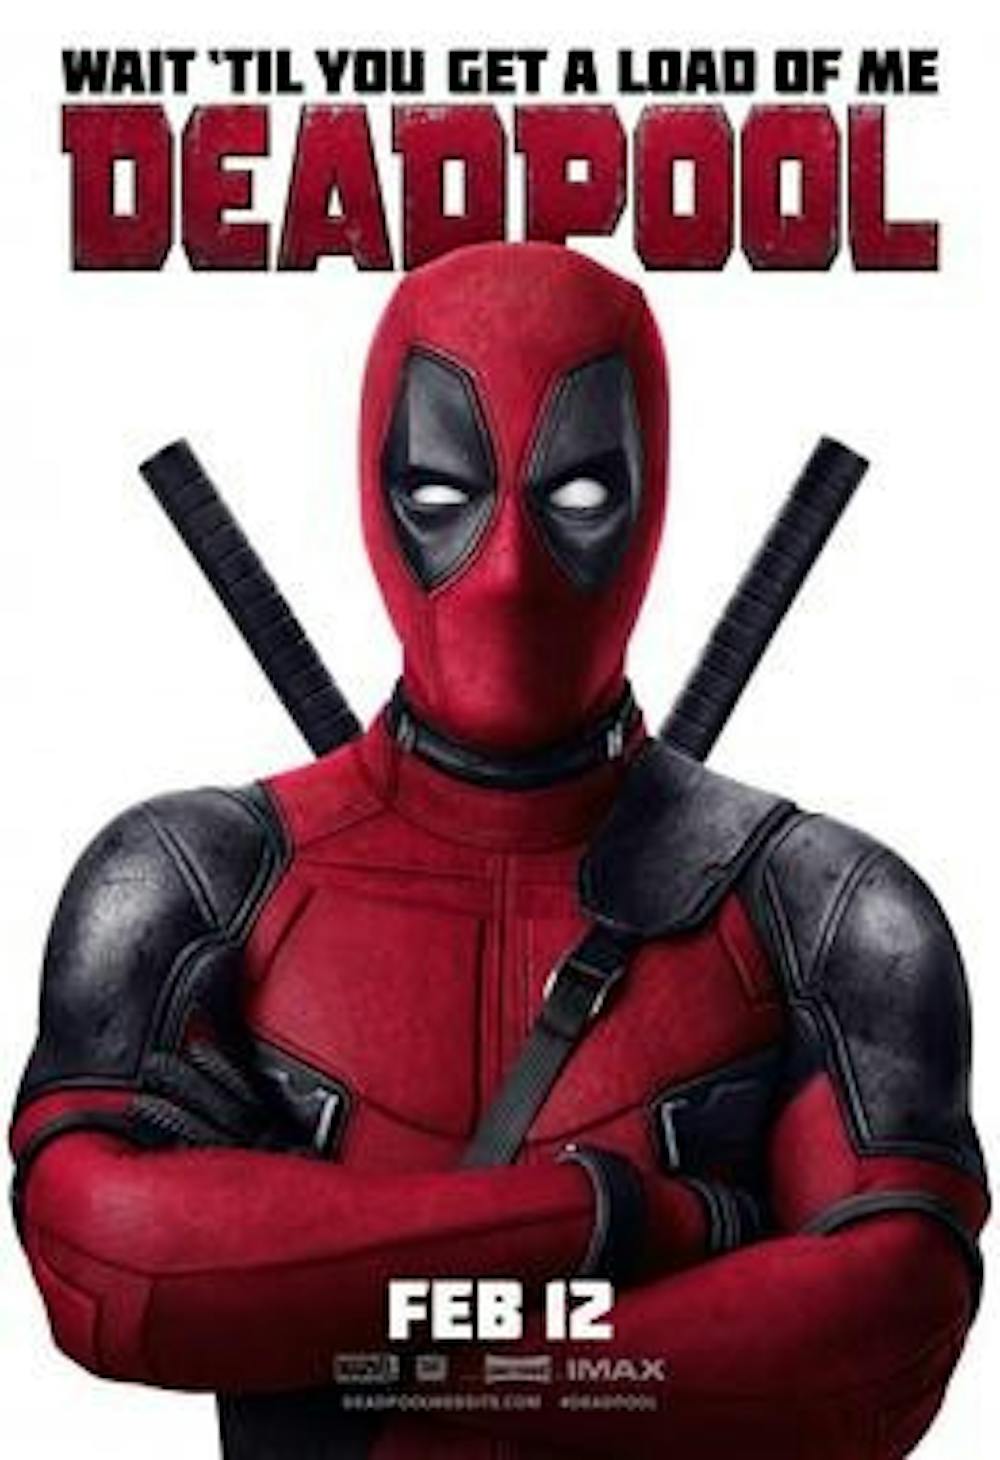 <p>The highly-anticipated film "Deadpool" sees highs and lows.</p>